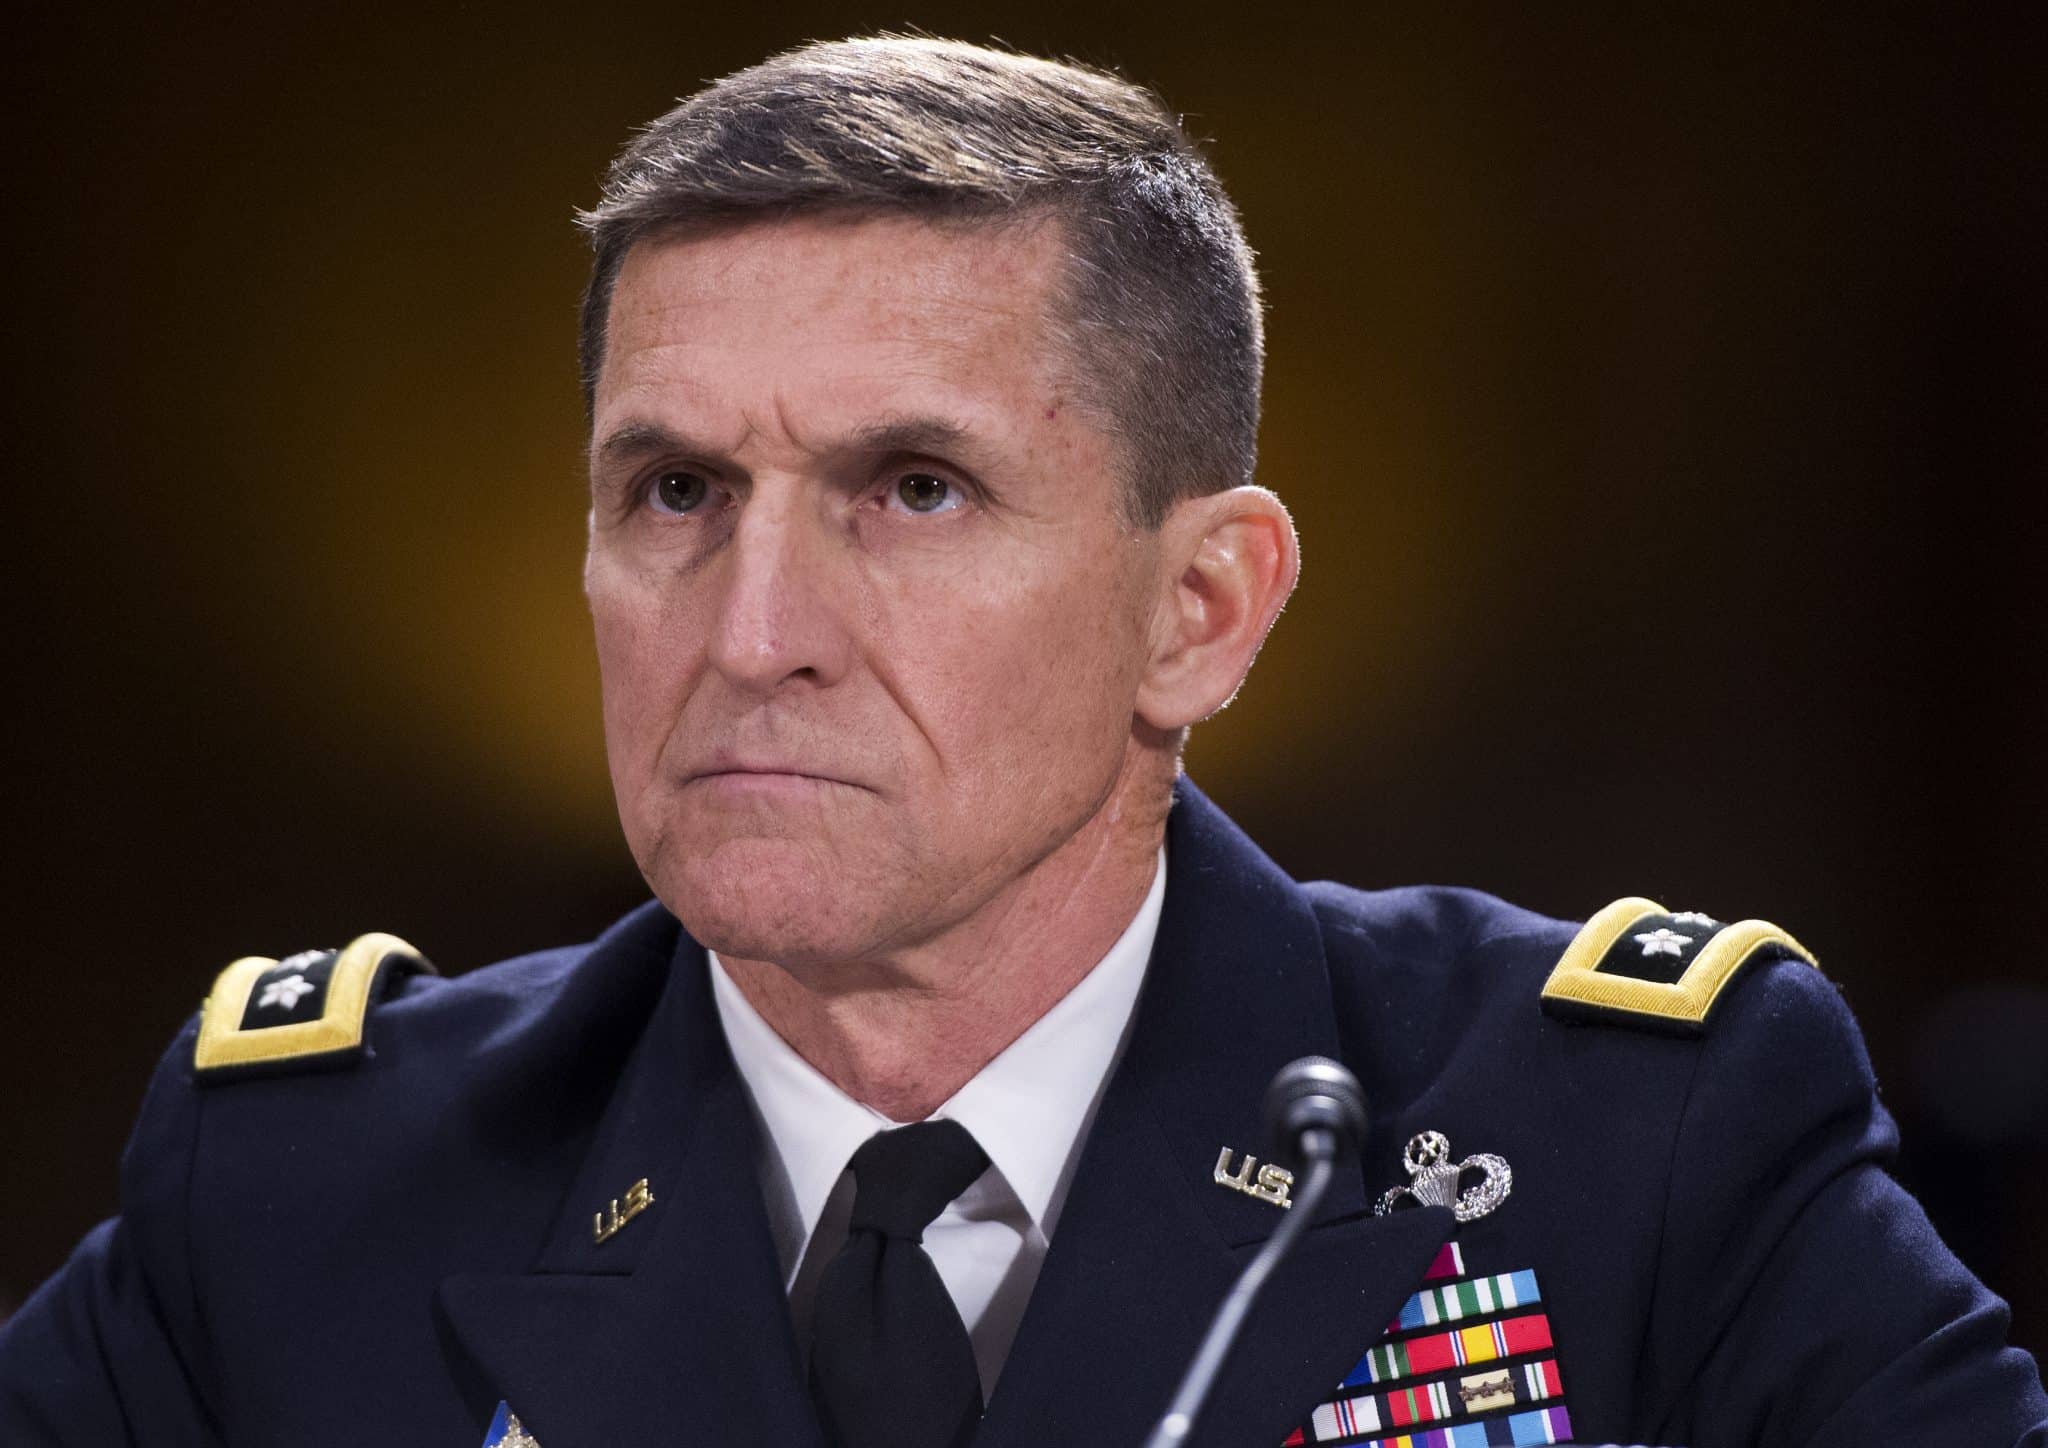 Gen. Flynn Tells The Western Journal in Next 24 Hours Massive Corruption Will Be Exposed